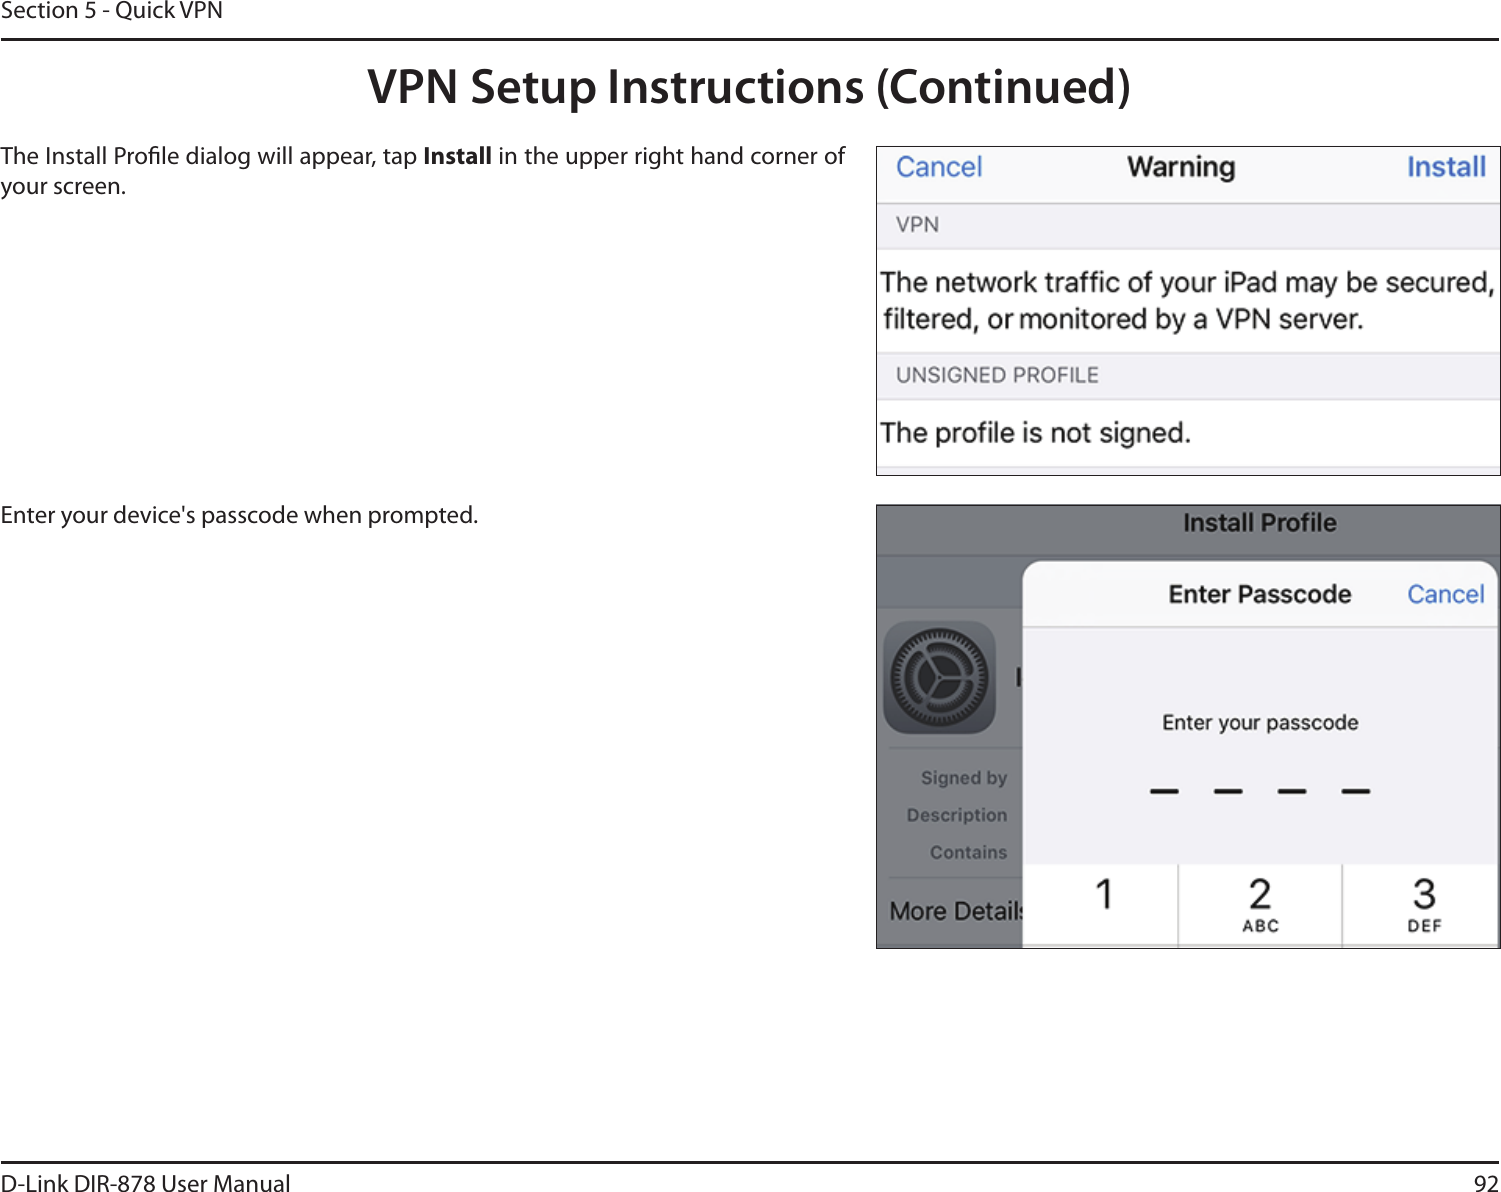 92D-Link DIR-878 User ManualSection 5 - Quick VPNThe Install Prole dialog will appear, tap Install in the upper right hand corner of your screen.Enter your device&apos;s passcode when prompted. VPN Setup Instructions (Continued)